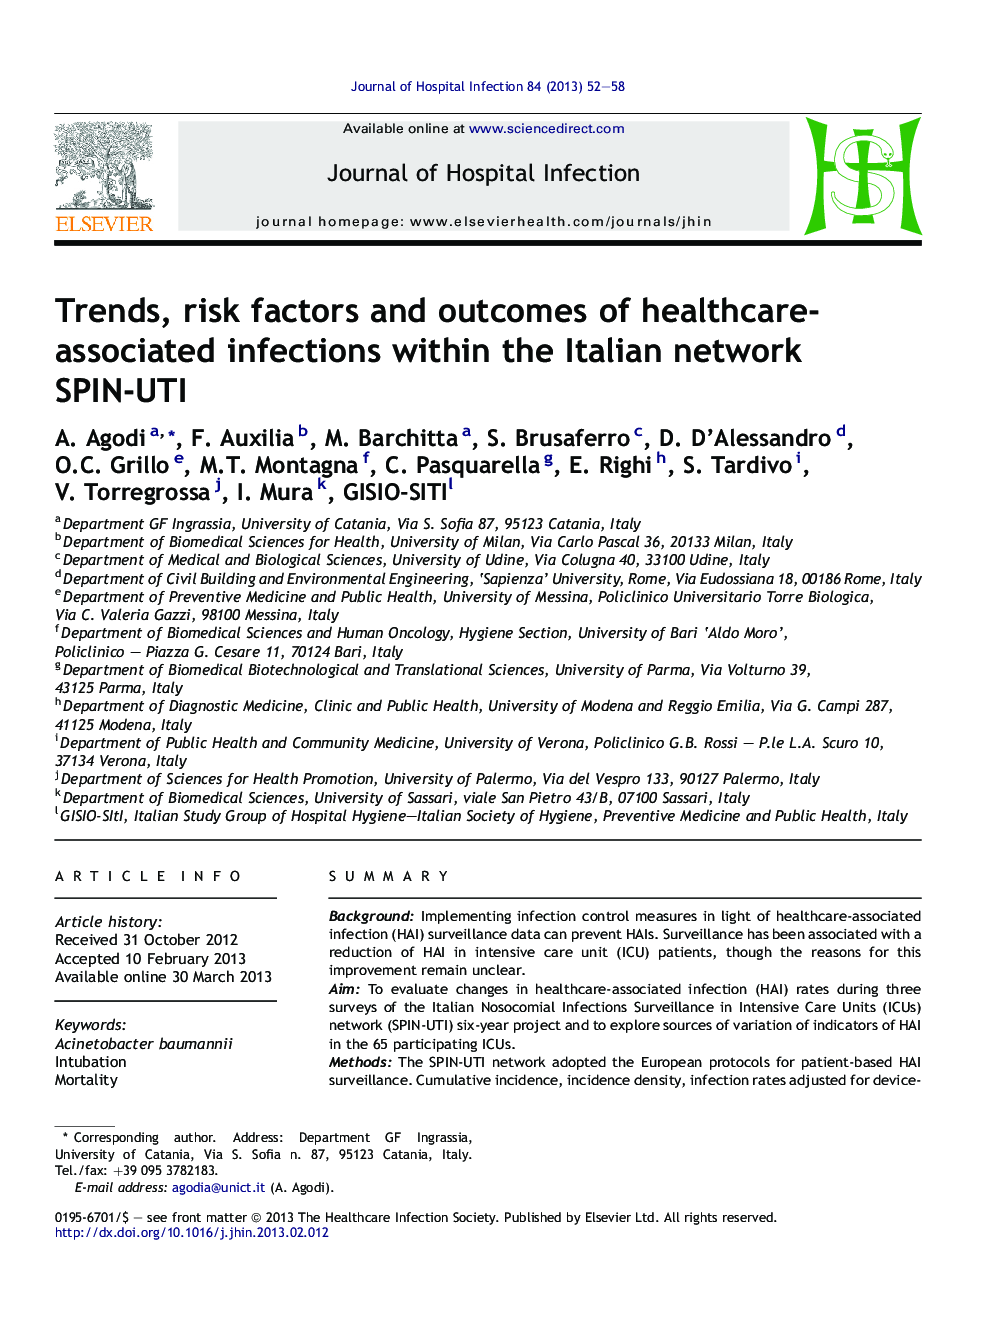 Trends, risk factors and outcomes of healthcare-associated infections within the Italian network SPIN-UTI